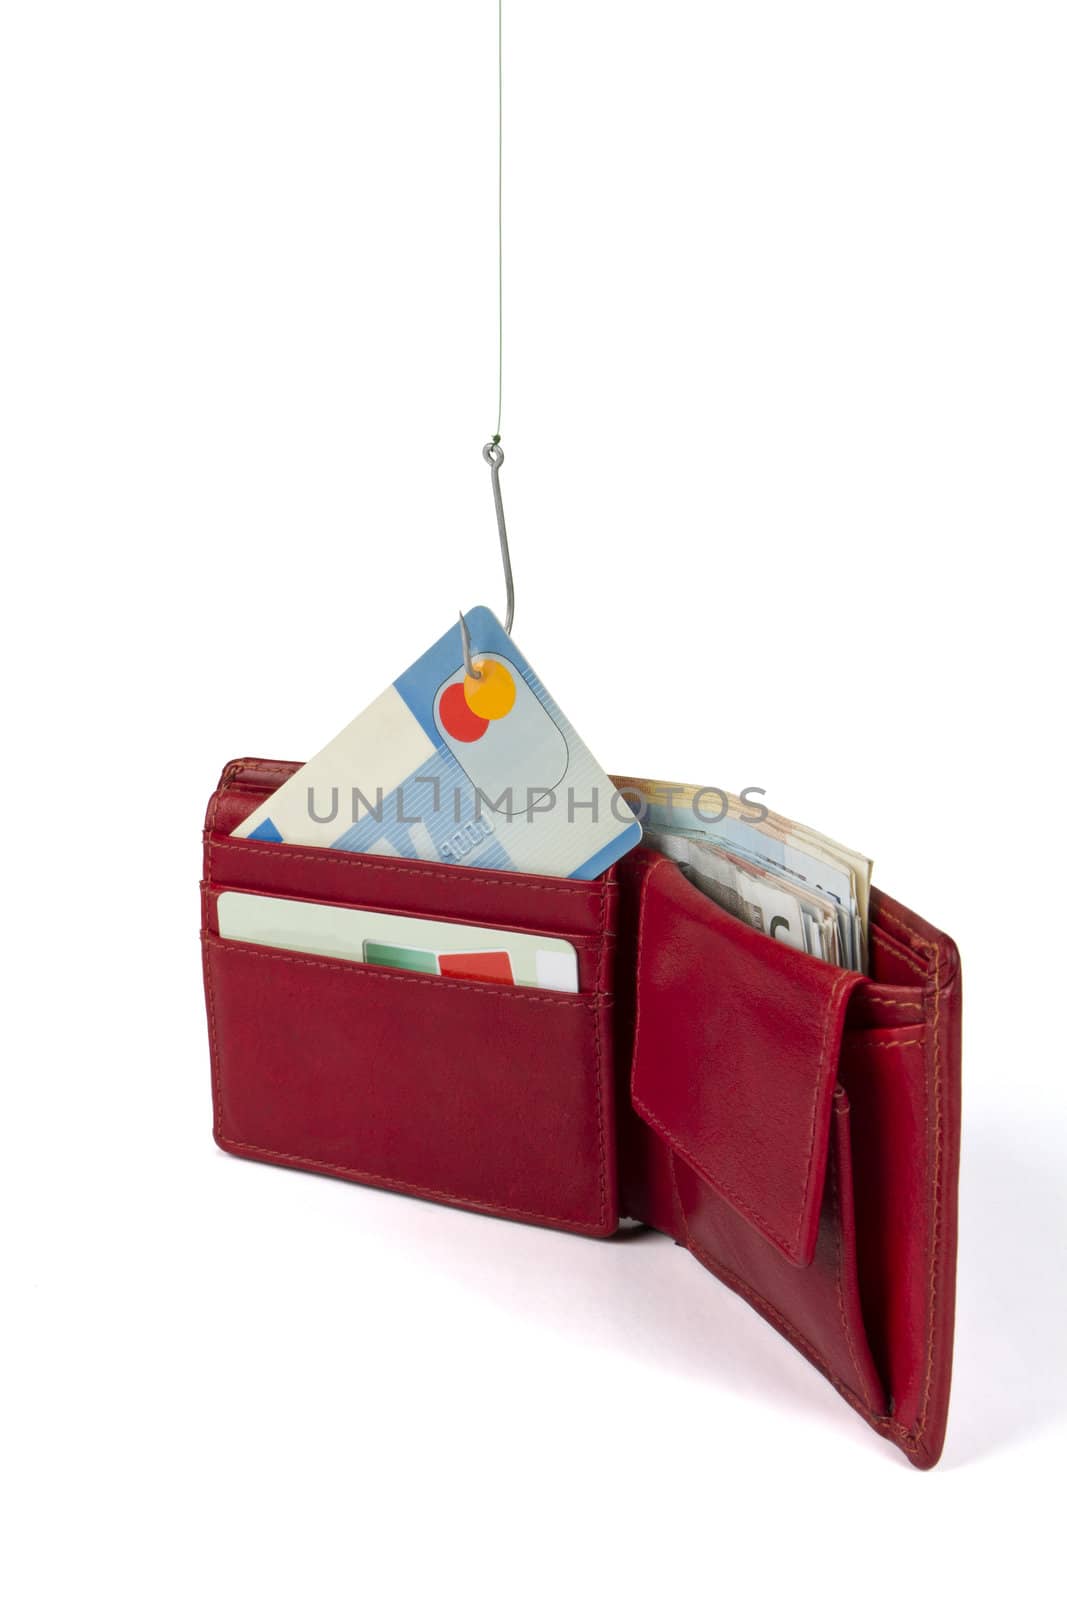 stealing credit card out of wallet by gewoldi